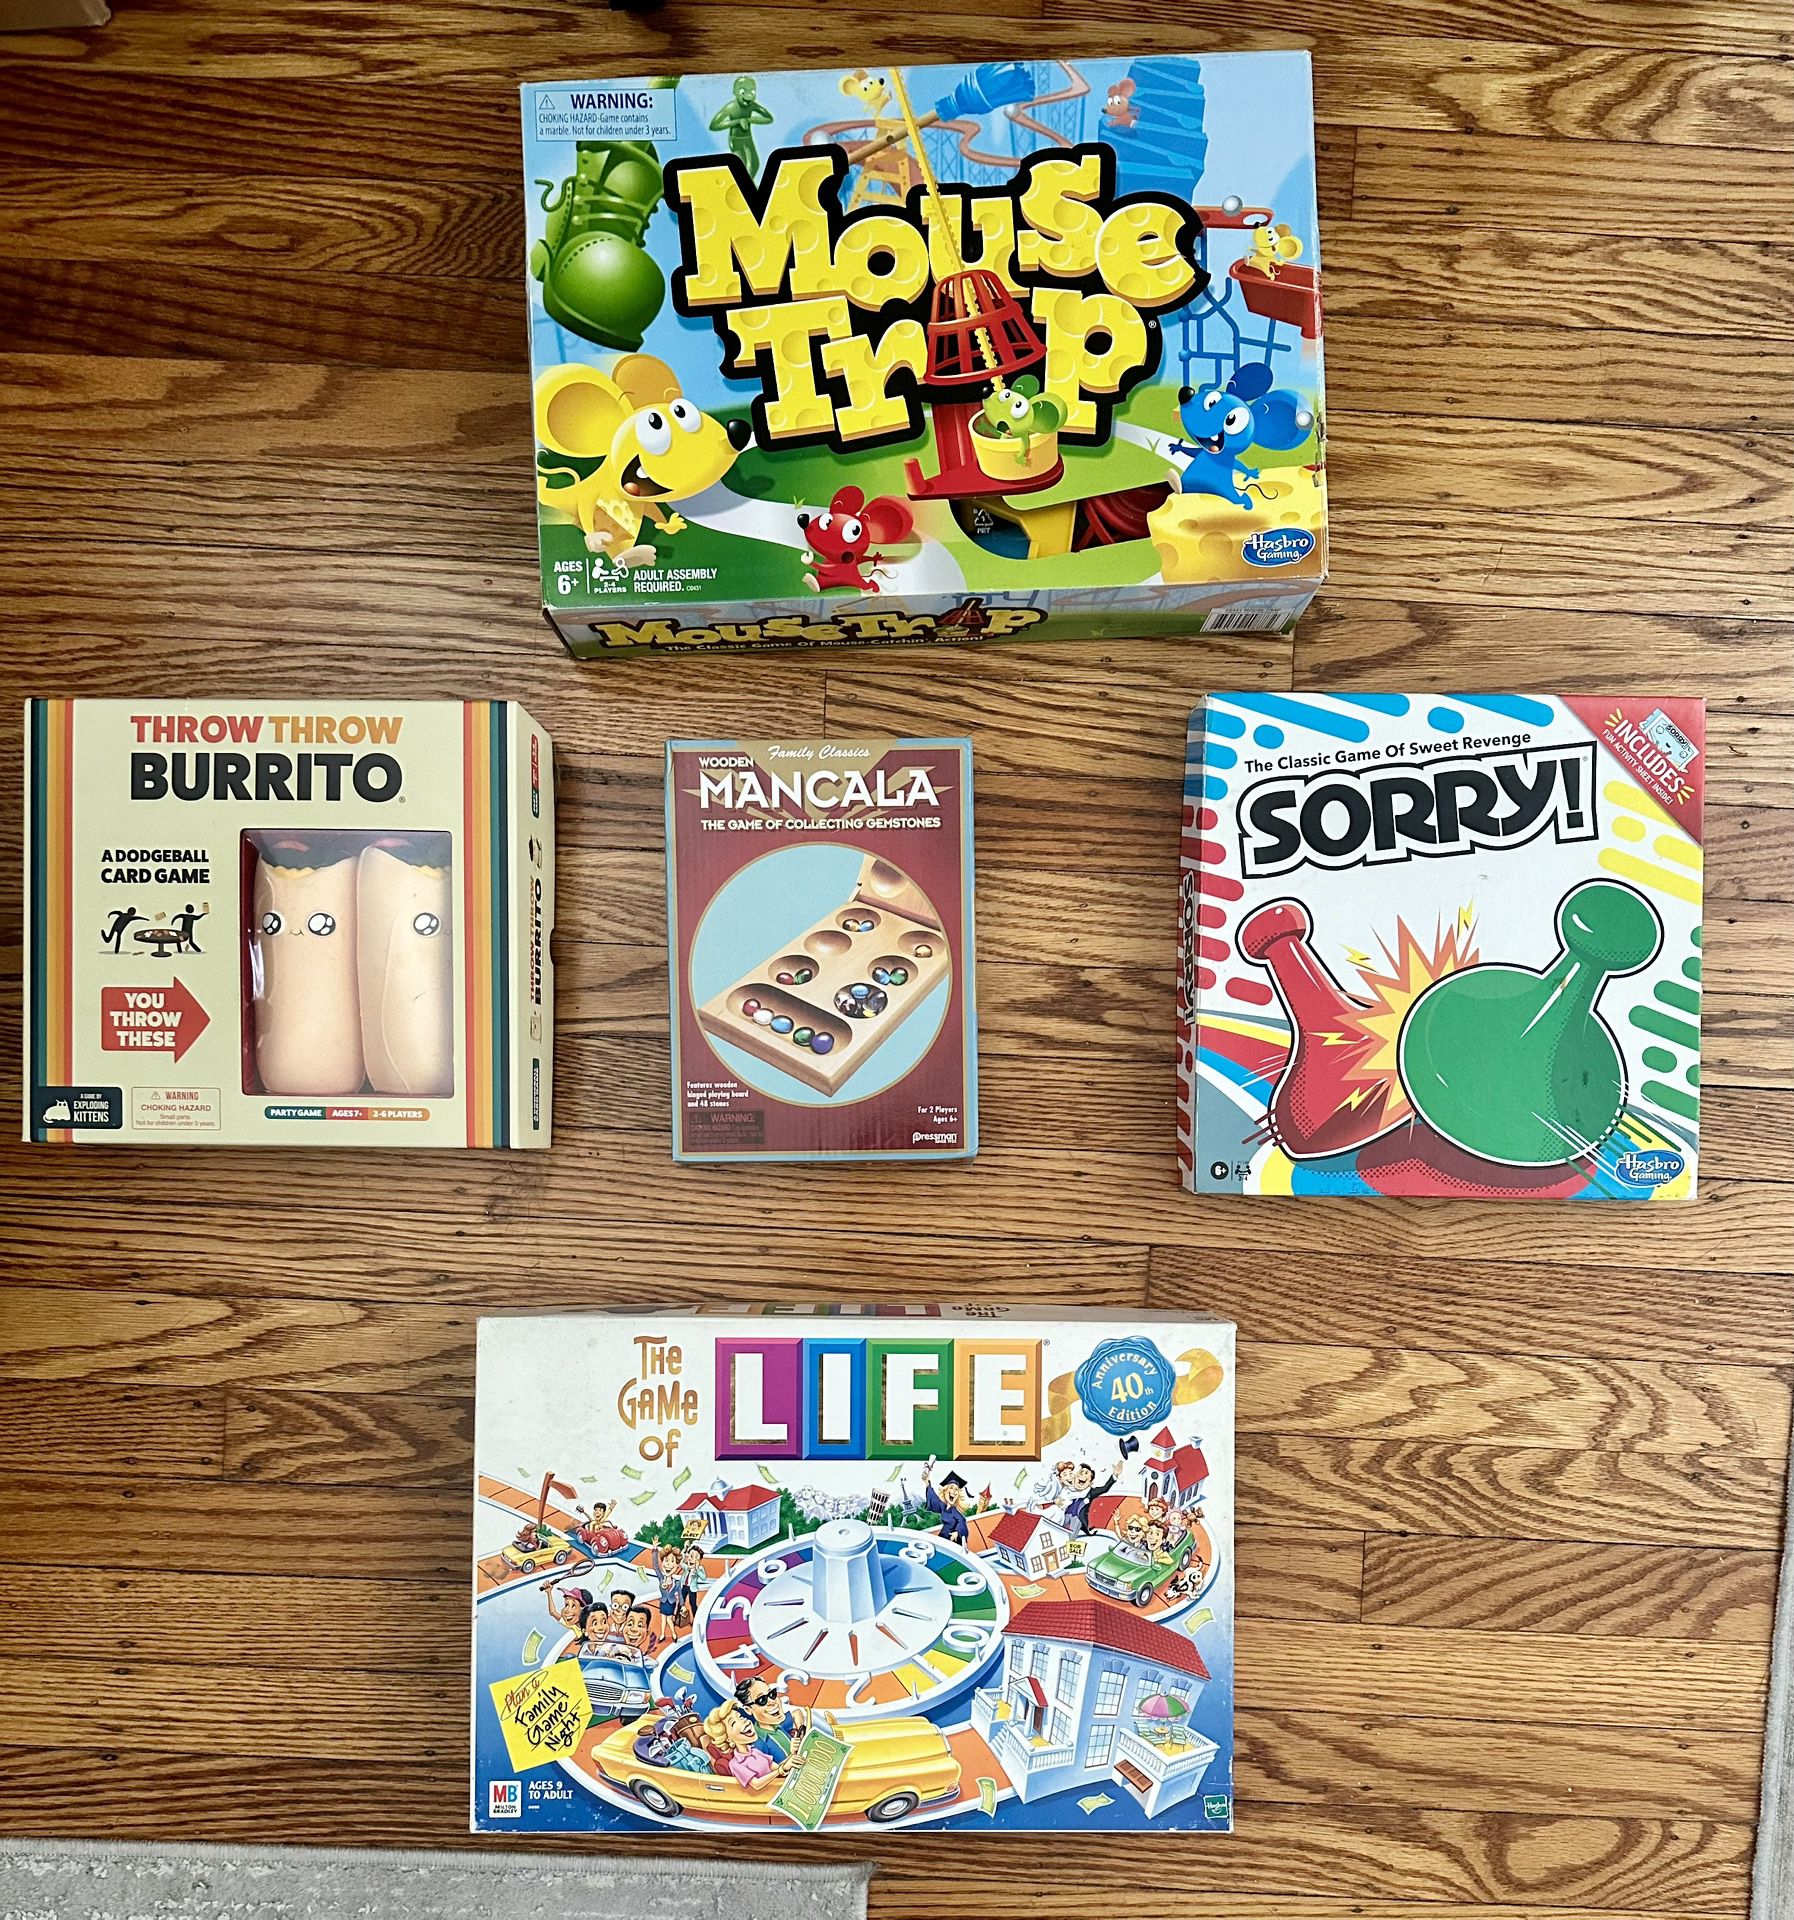 Board games $5 Each Or All For $20